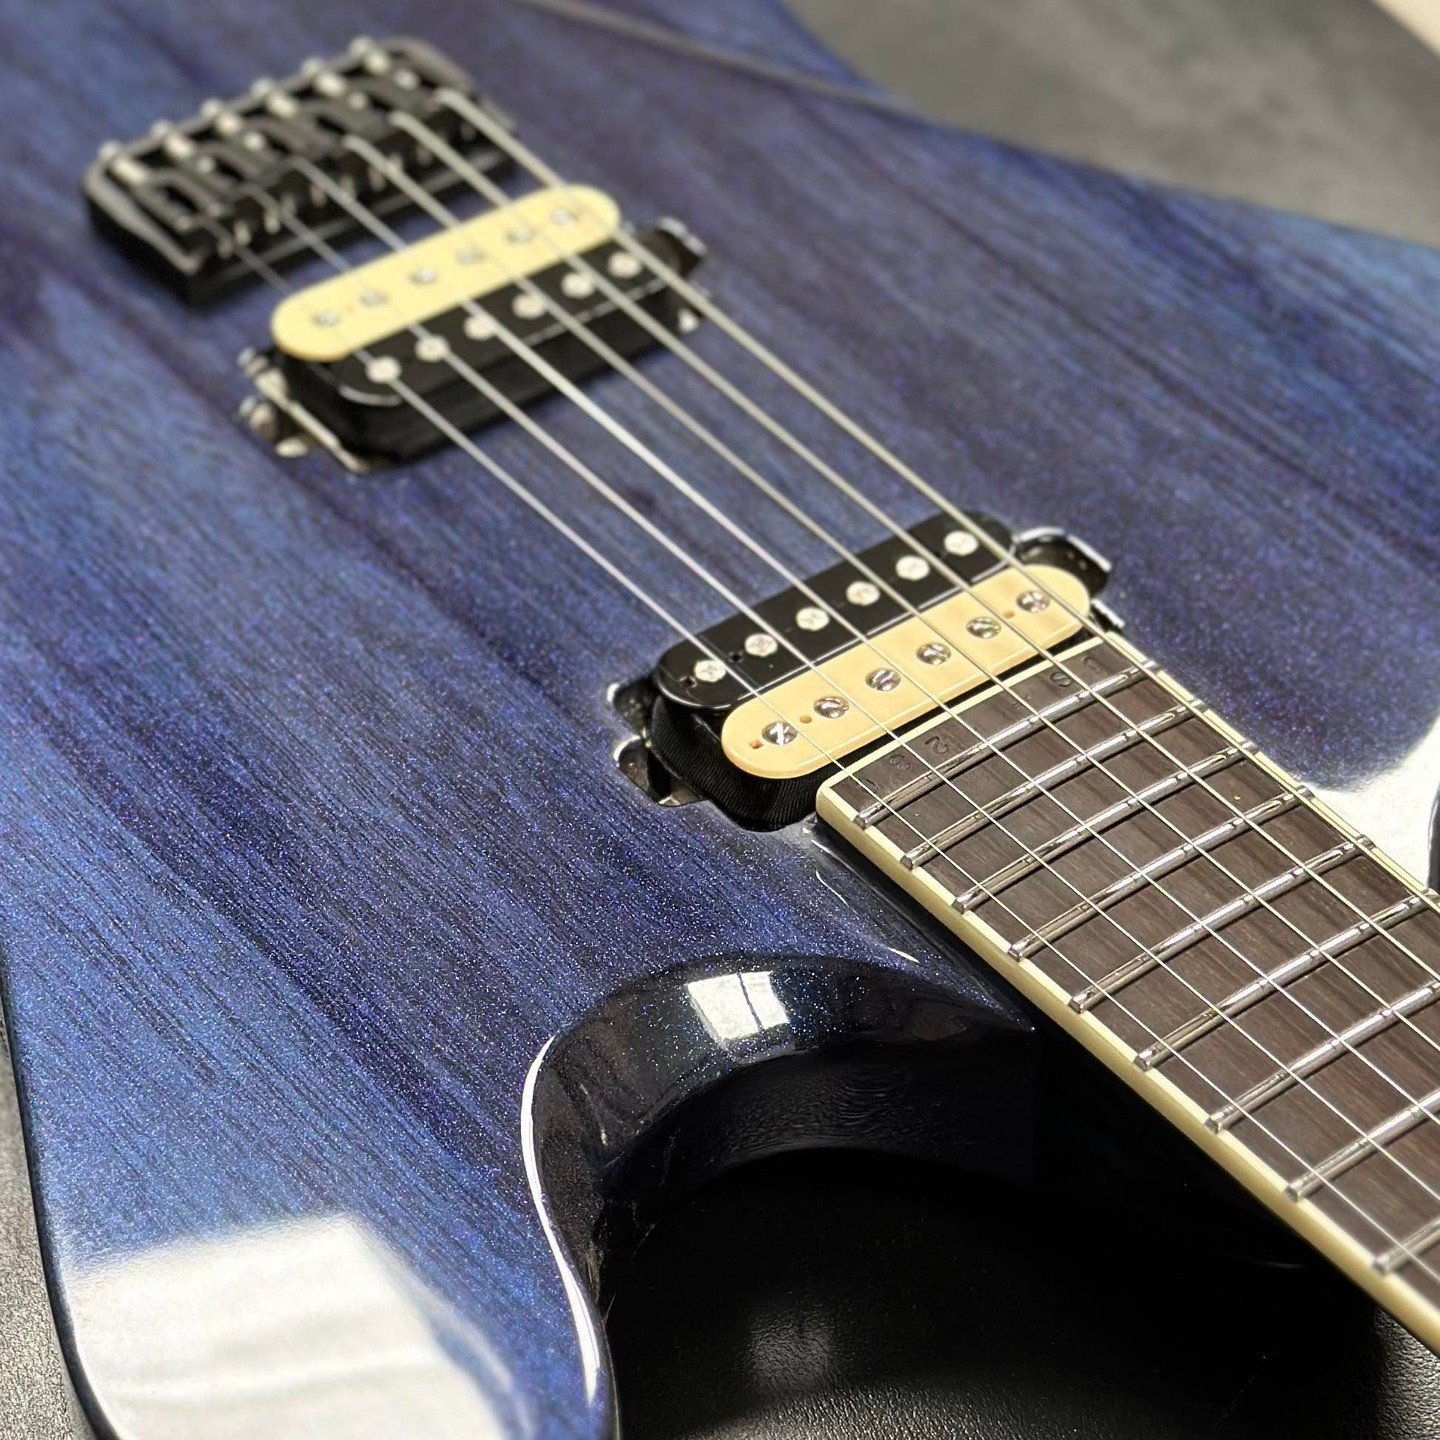 I told you if you were nice I'd post closeups, so... Glamazon 🤝 Shipwreck. Can't hurt to combine 2 of our favorite finishes, right? 

#sullyguitars #builtbyrockandroll #raven #blacklimba #makeitsparkle